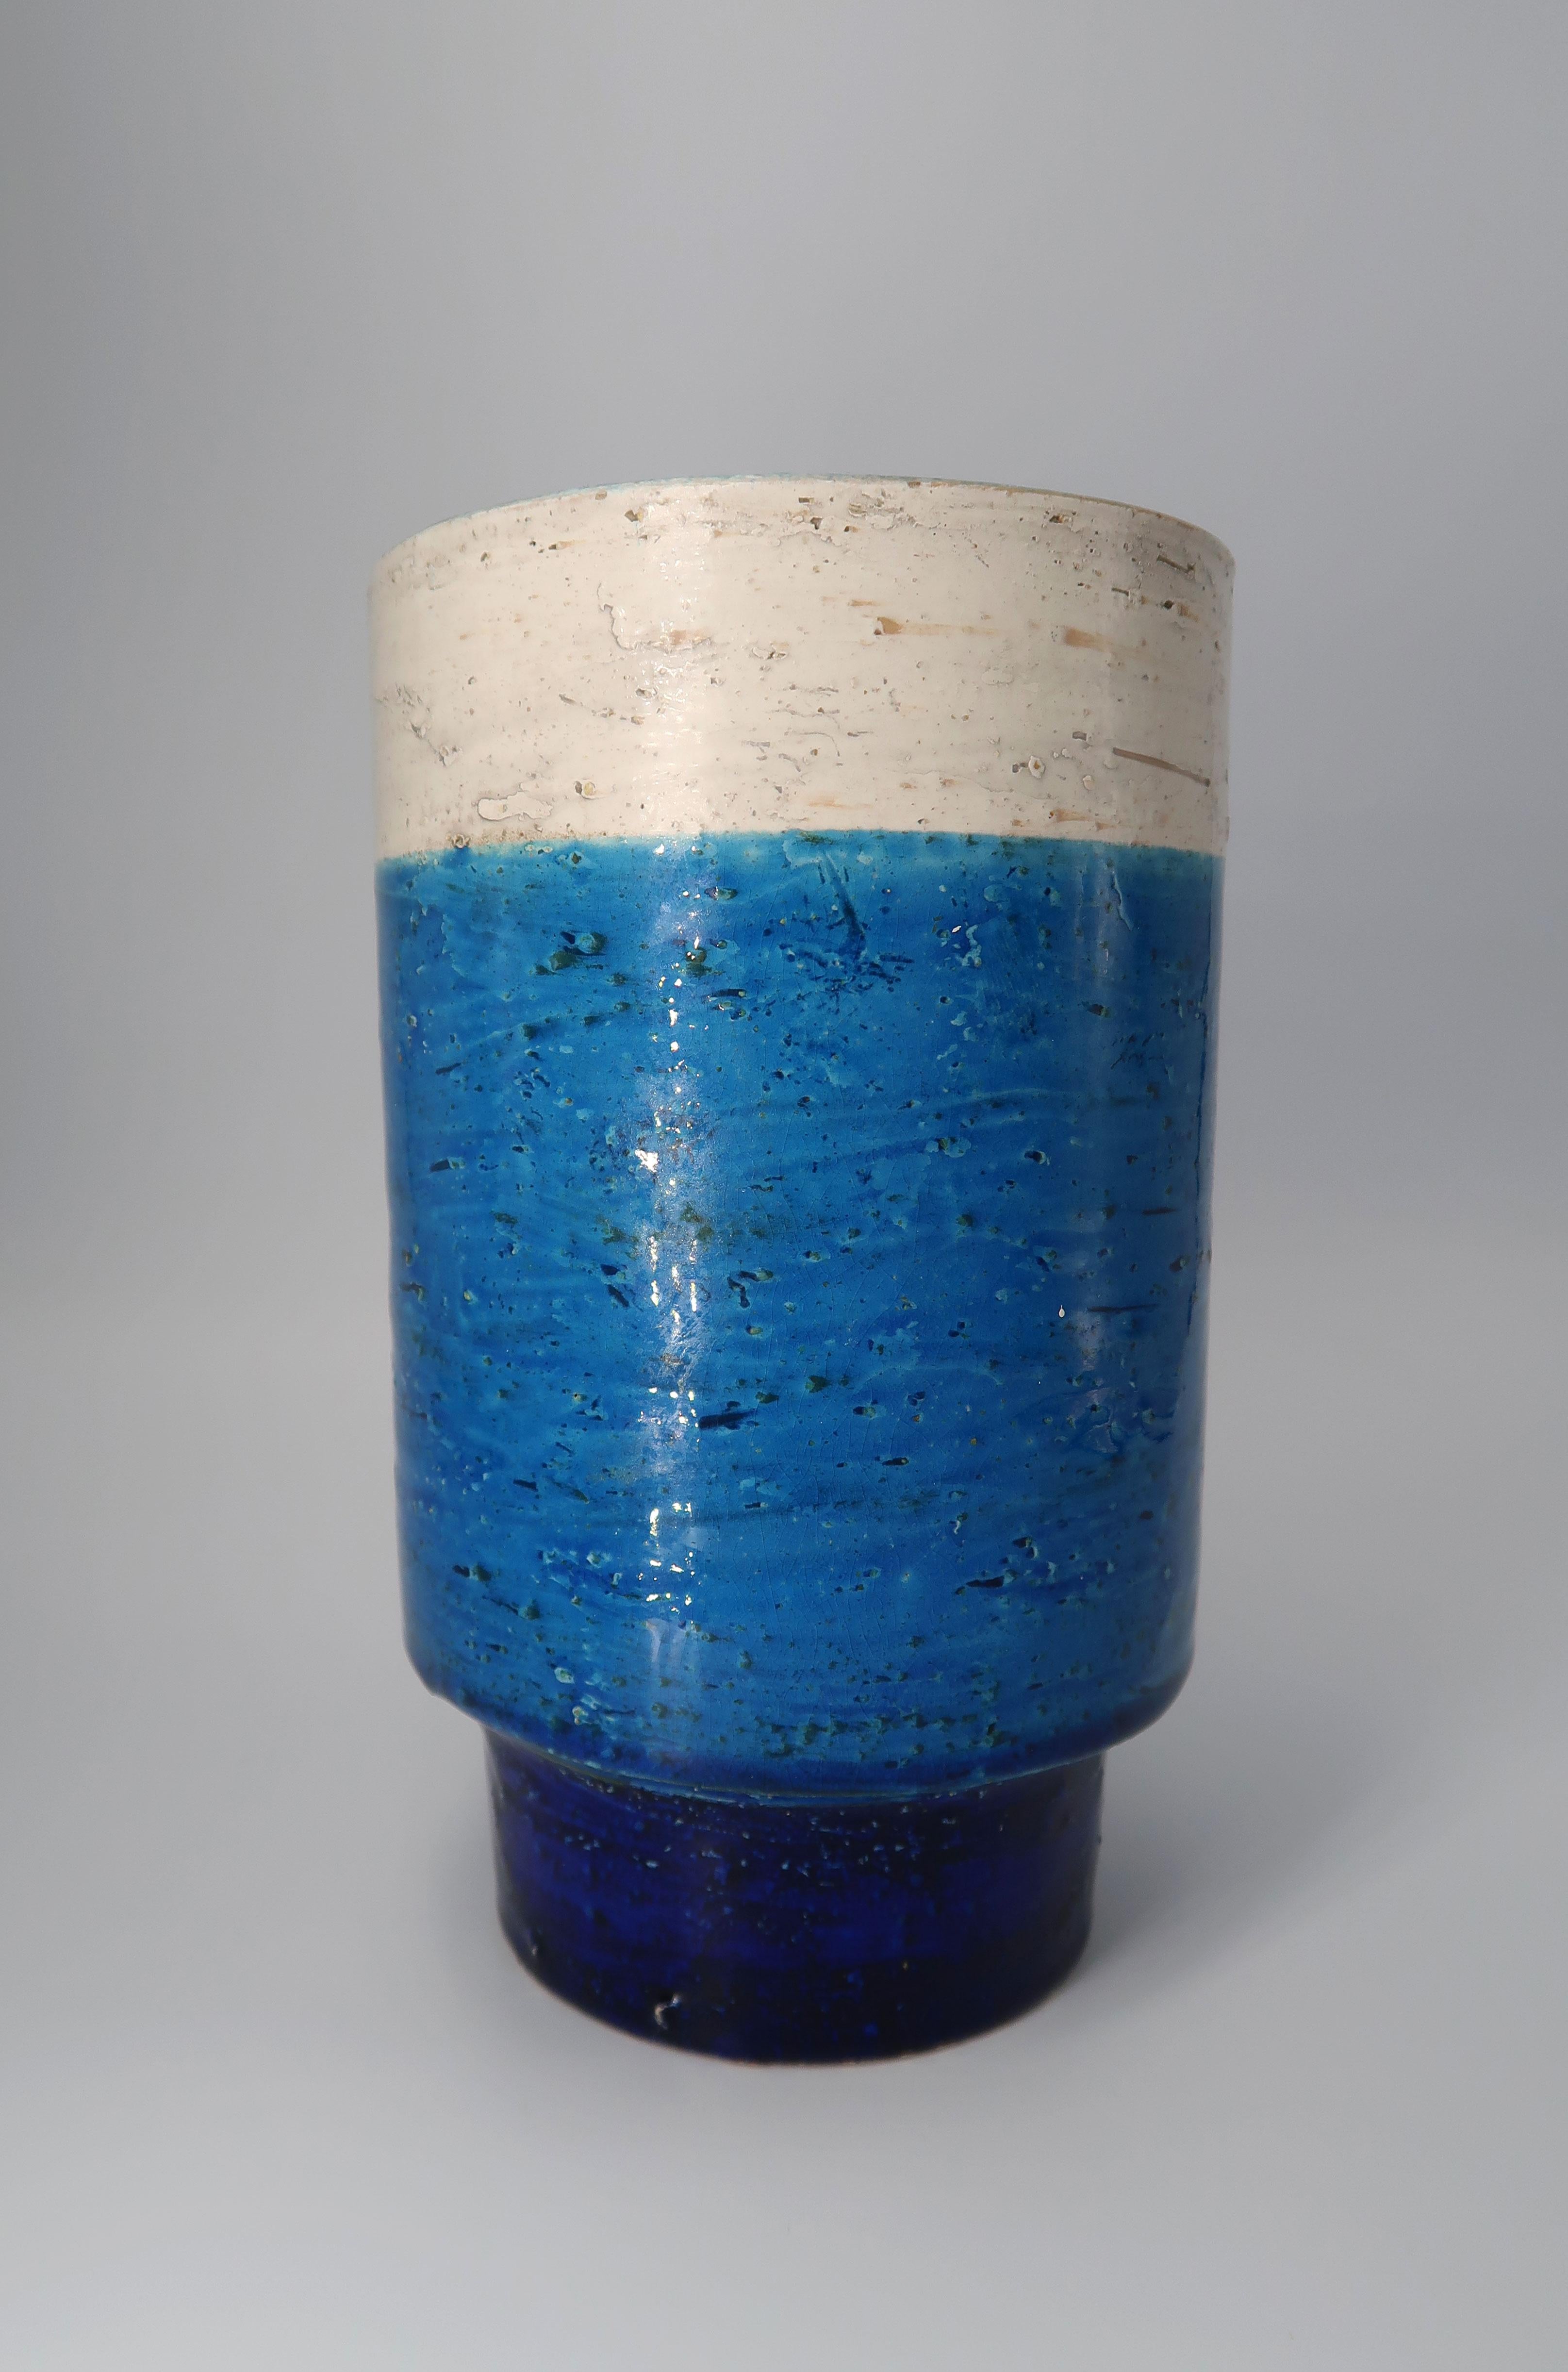 Beautiful and smooth shiny glazed Italian Mid-Century Modern vase attributed to Aldo Londi (1911-2003) for Bitossi Ceramiche. Shiny glaze on chamotte clay. Londi's trademark color Rimini Blu on the belly and the inside, dark blue on the bottom and a